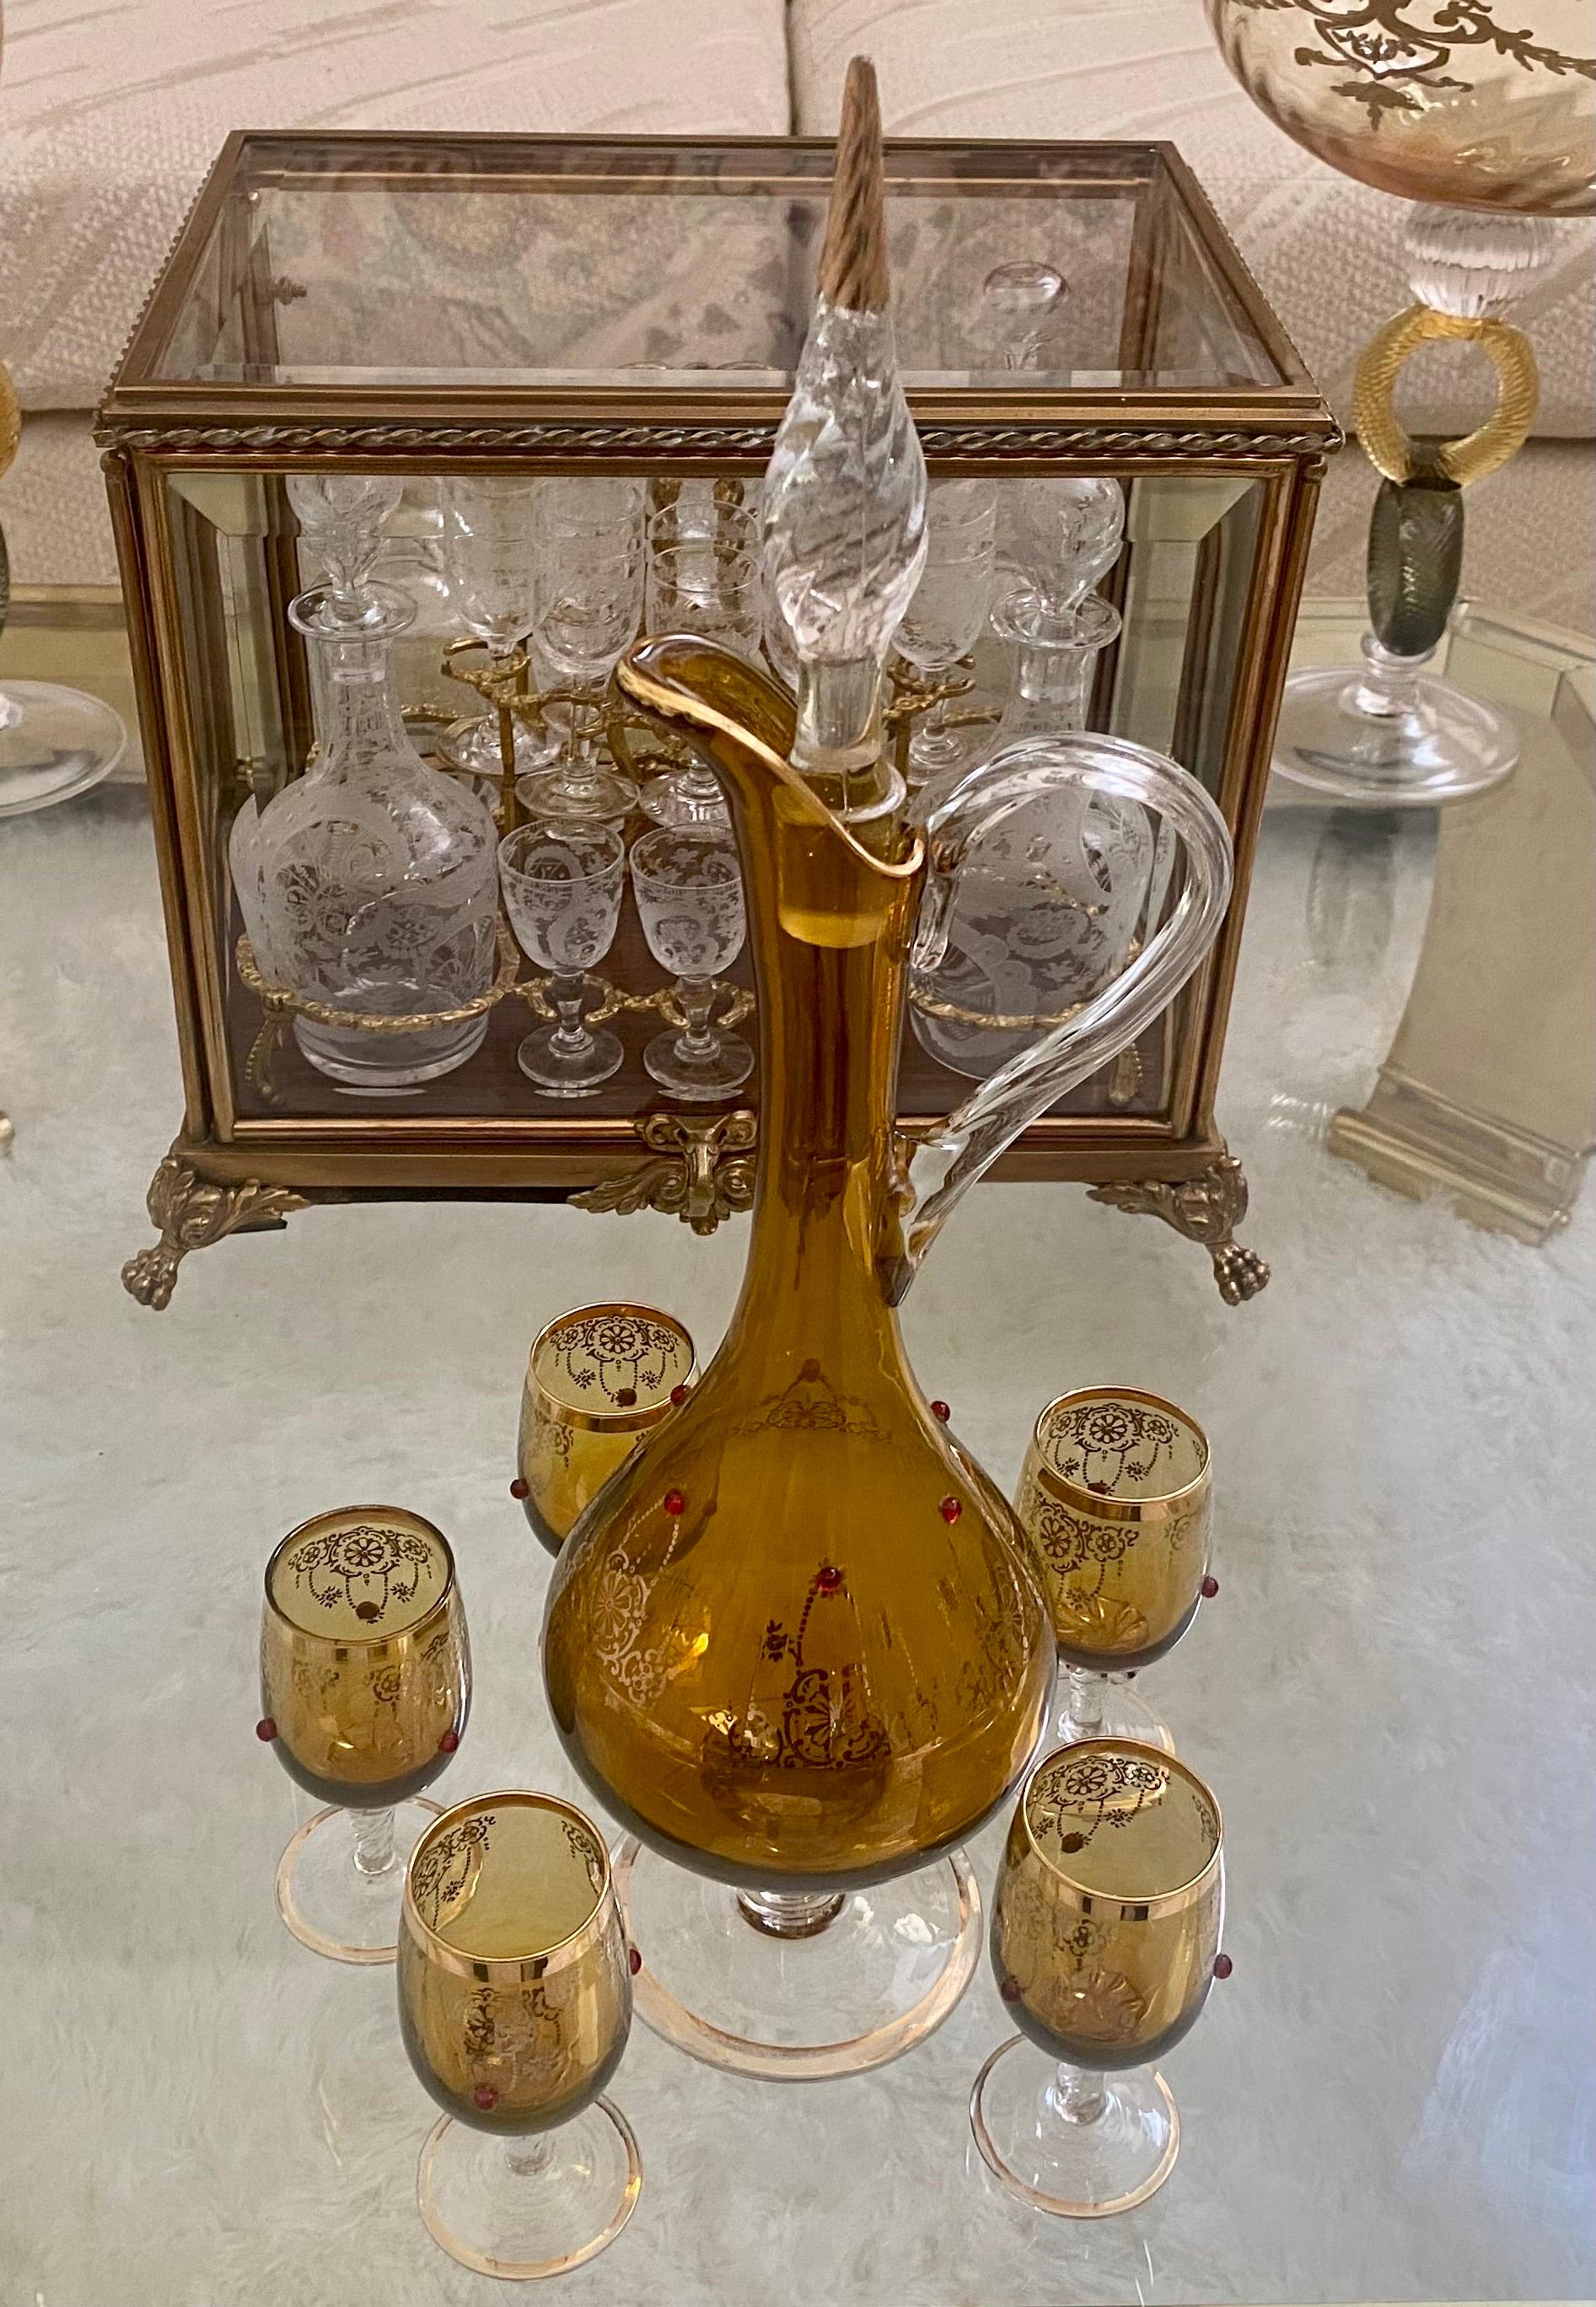 20th Century Gold Etched Venetian Glass Decanter Set with Enamel Accents